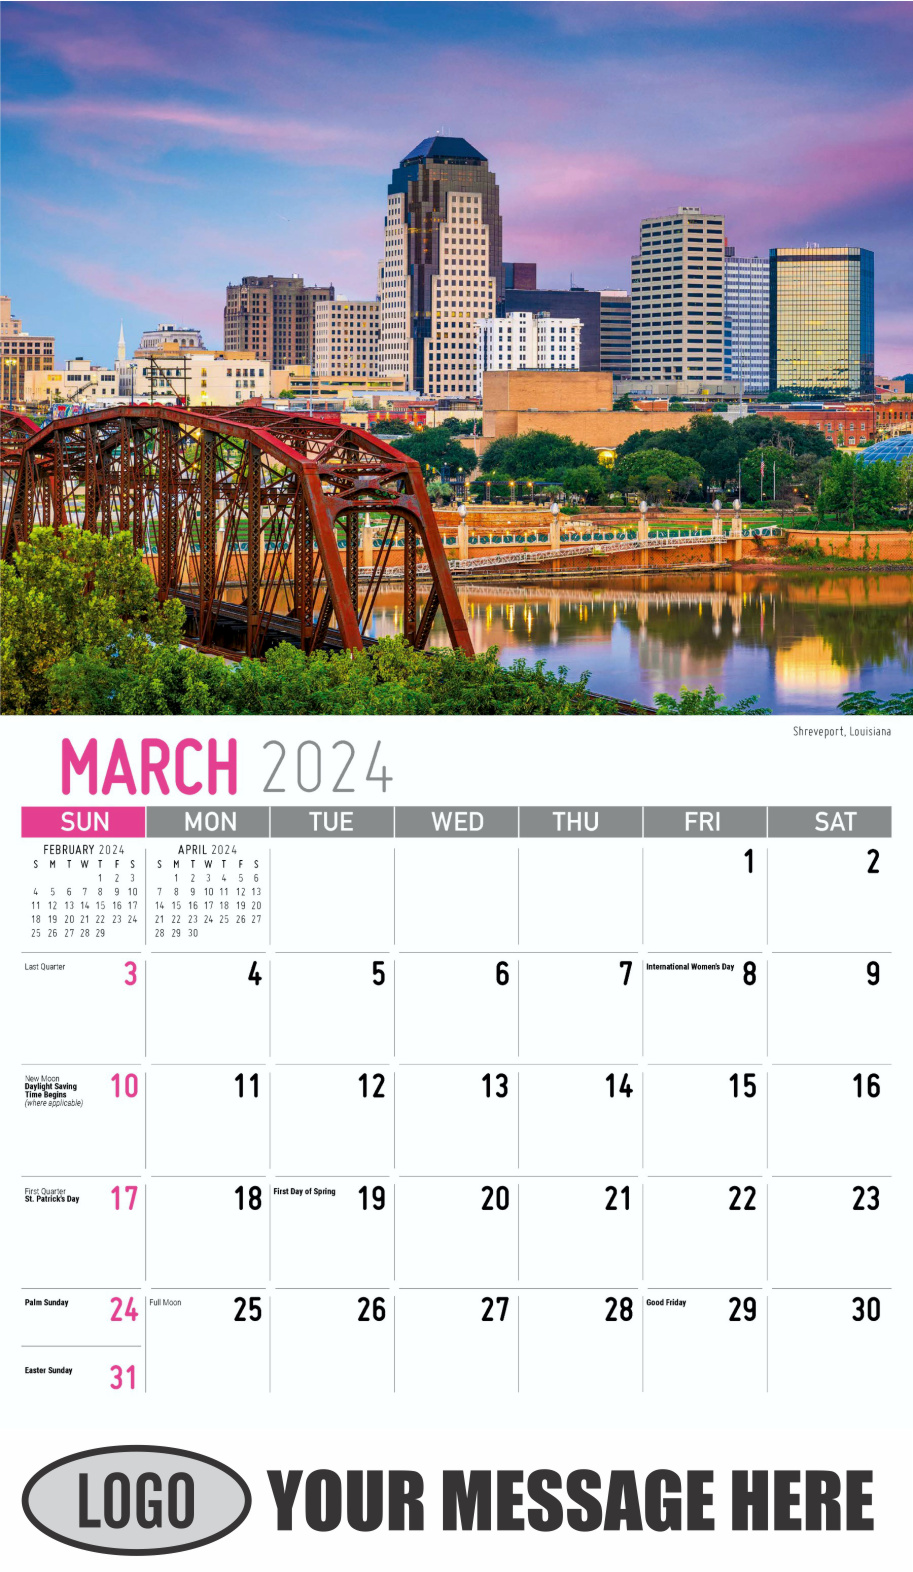 Scenes of Southeast USA 2024 Business Promo Wall Calendar - March